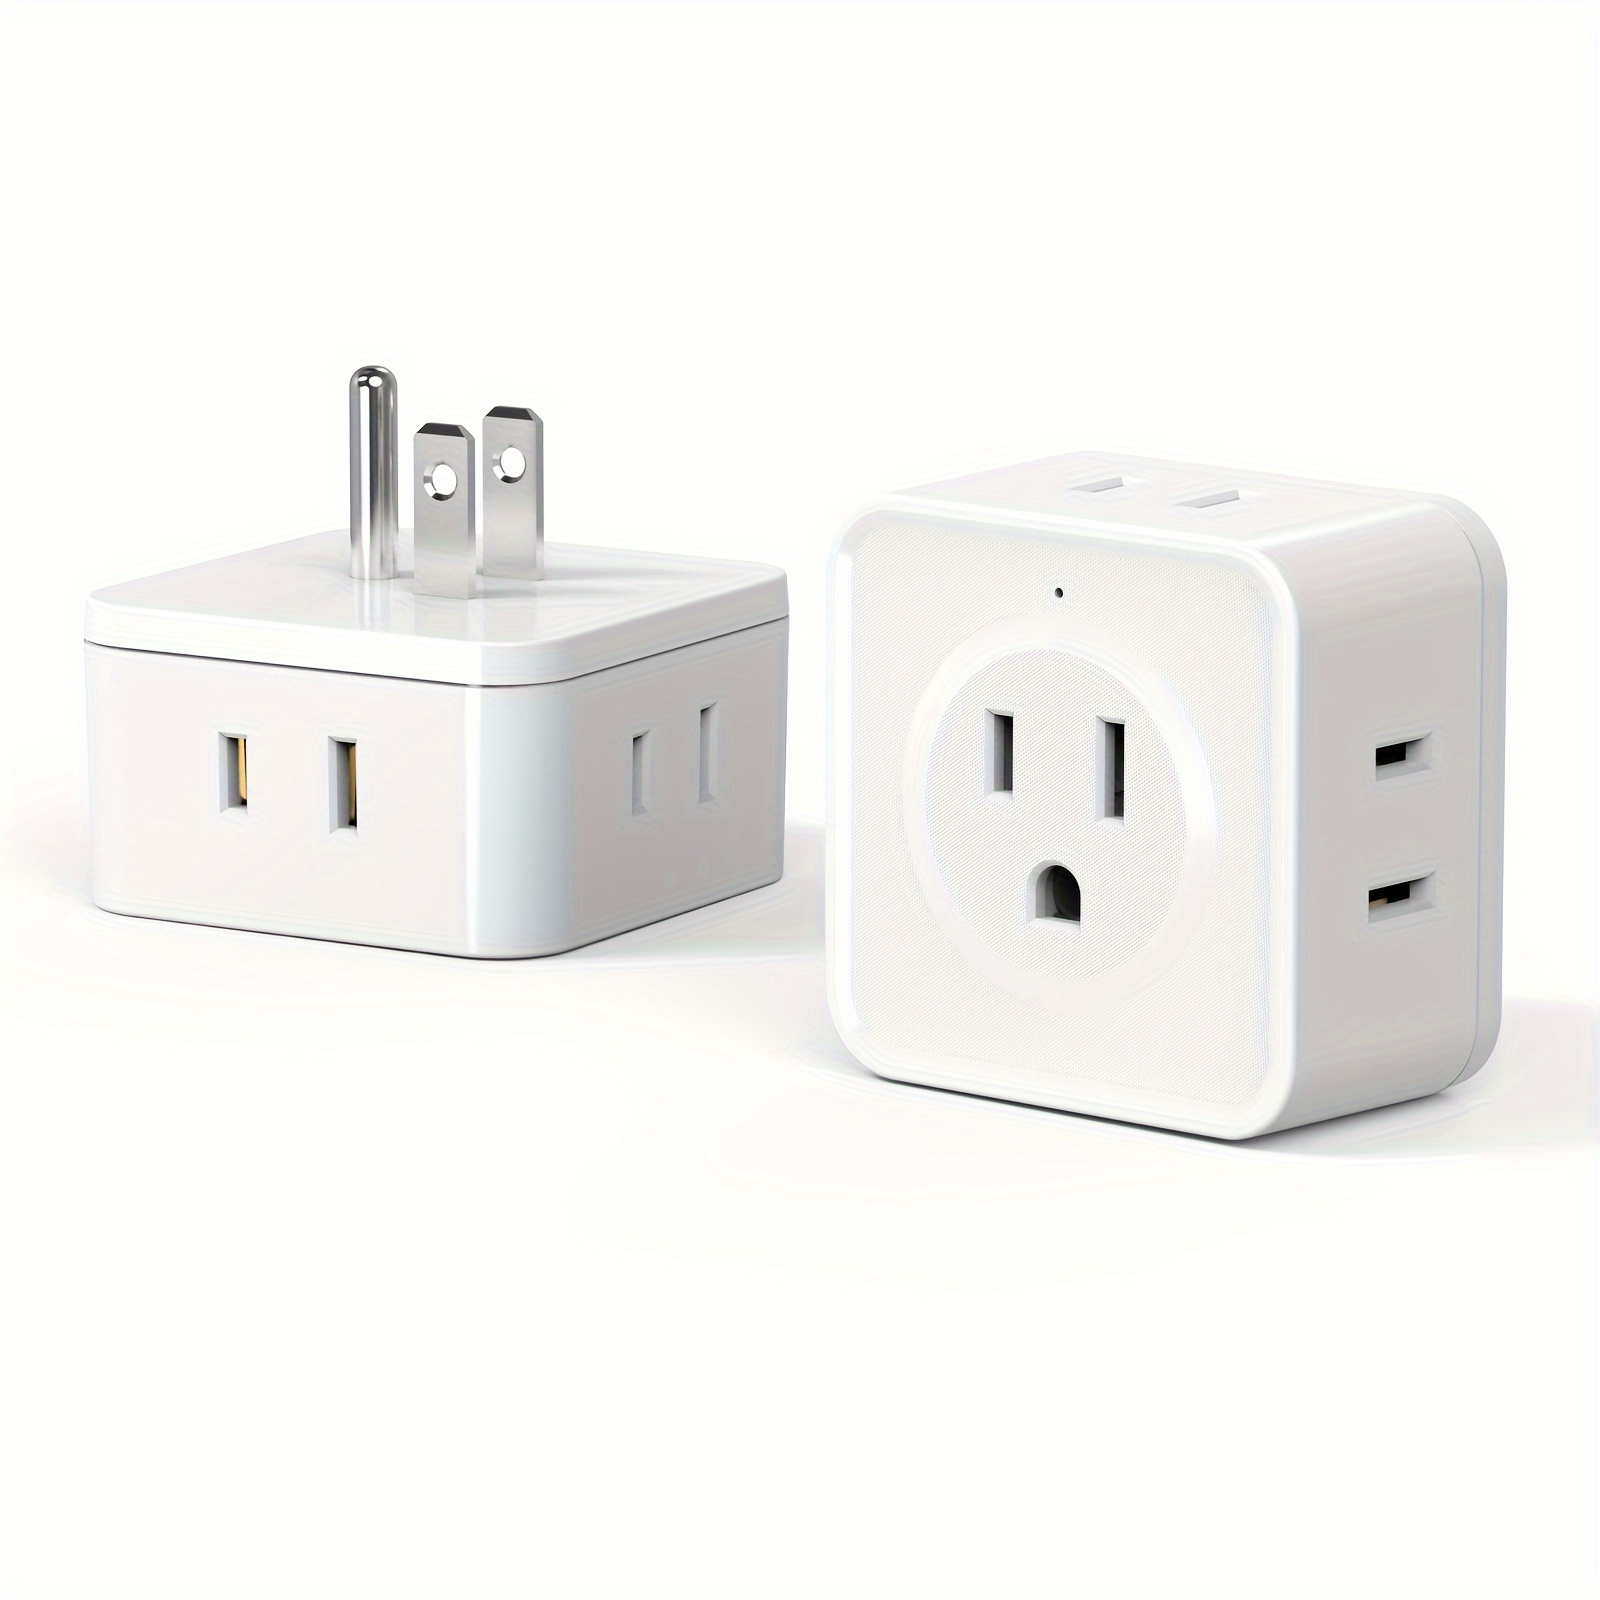 

1pc Multi Plug Outlet Extender With 5 Outlets, Compact Wall Charger Splitter, 3 Prong Plug Adapter, Power Box Expander For Home, Office, Hotel, Dorm, Cruise Ship - White